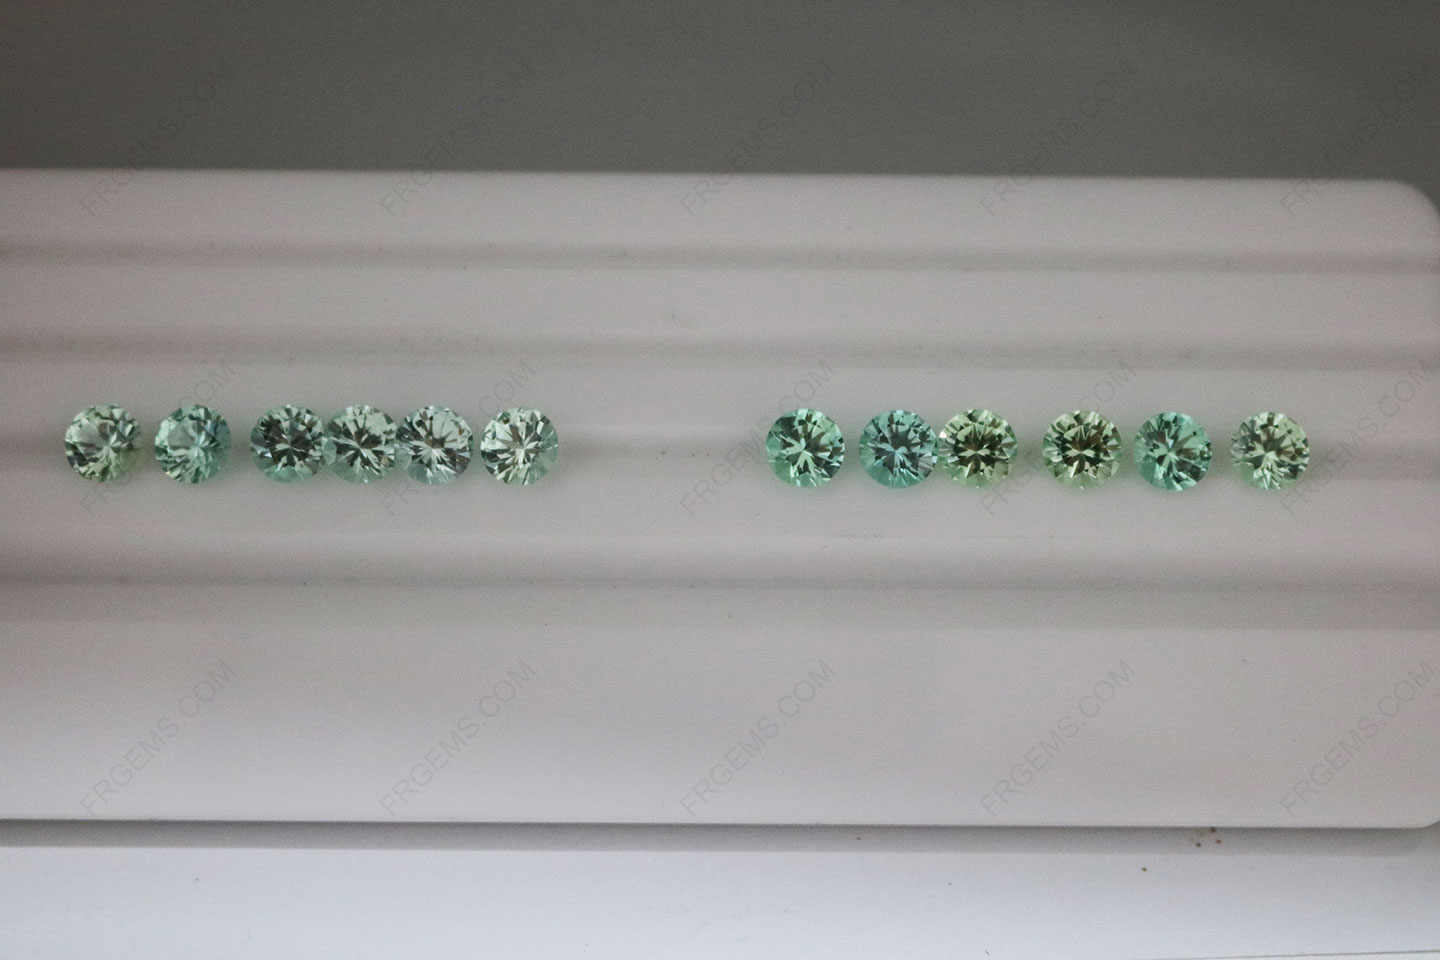 Wholesale Synthetic Corundum Mint Green 73# Round Shape Faceted